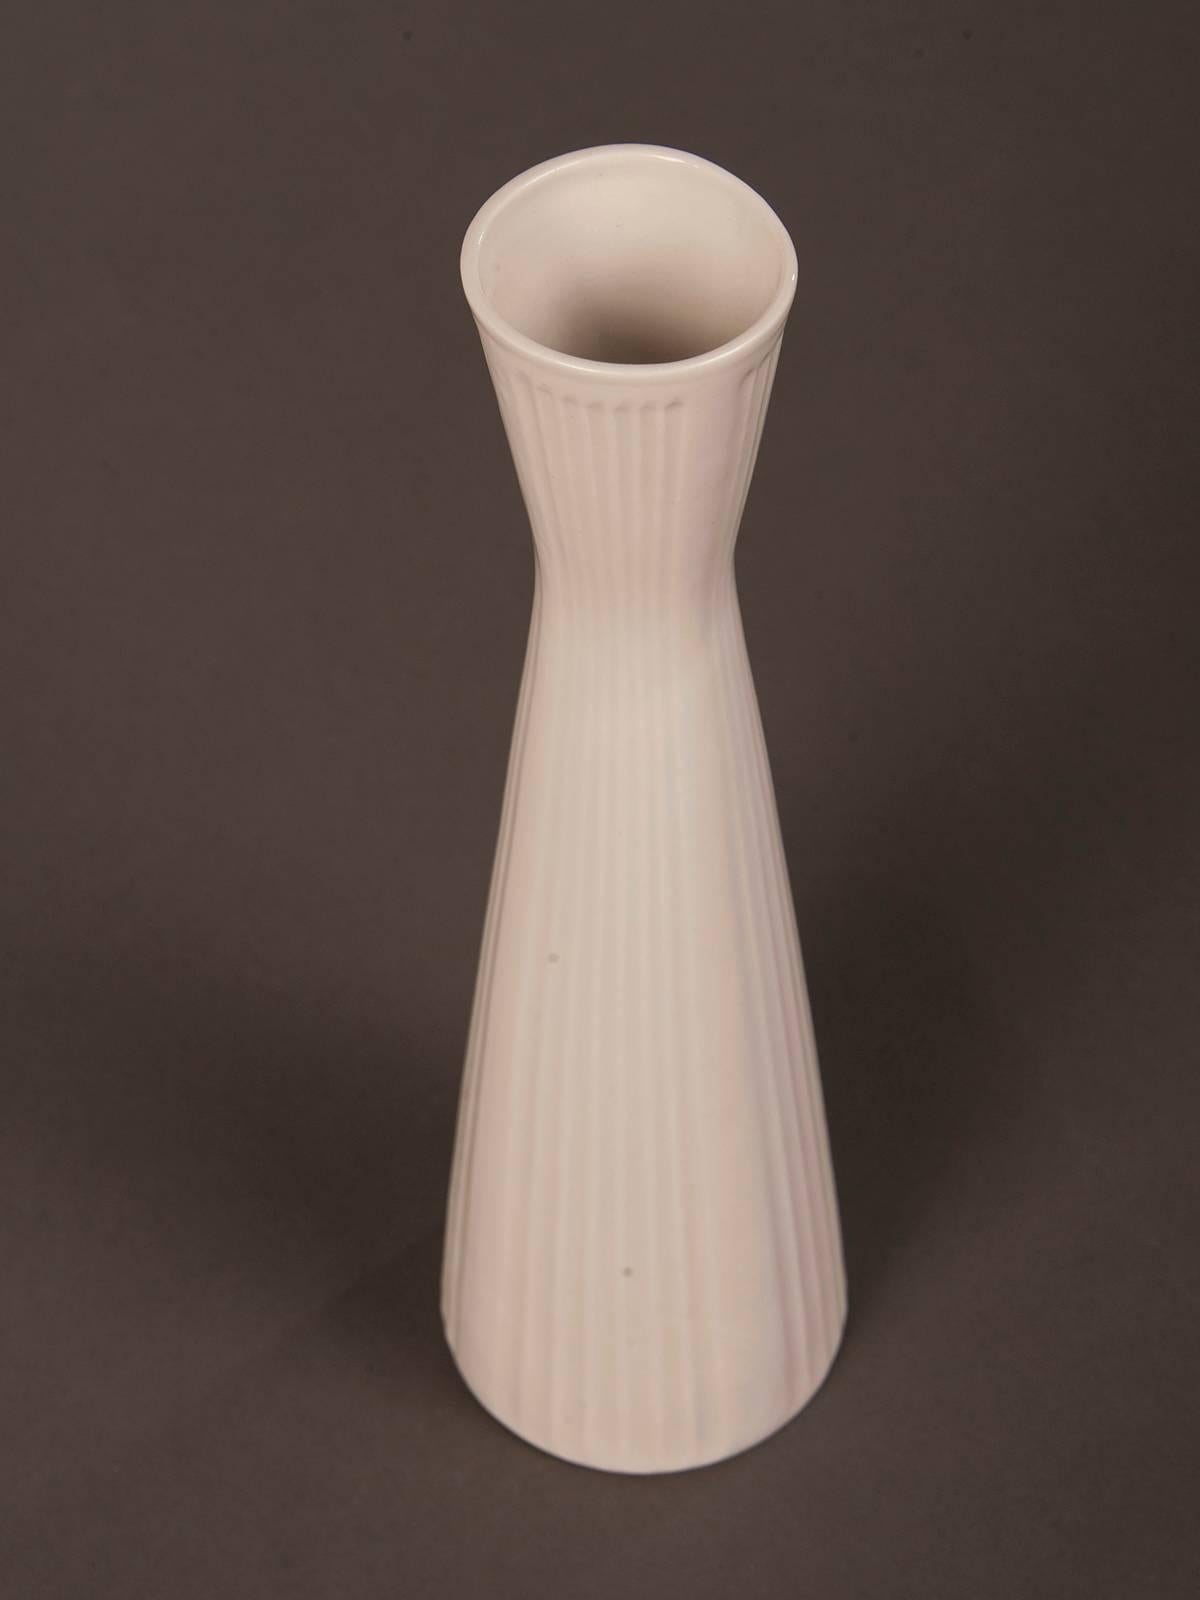 A tall Mid-Century Modern white porcelain vase with a tall flared shape from Germany, circa 1950 with the maker's stamp on the underside. This contemporary vase was manufactured by Schumann in Arzberg located in Bavaria in the southeast area of